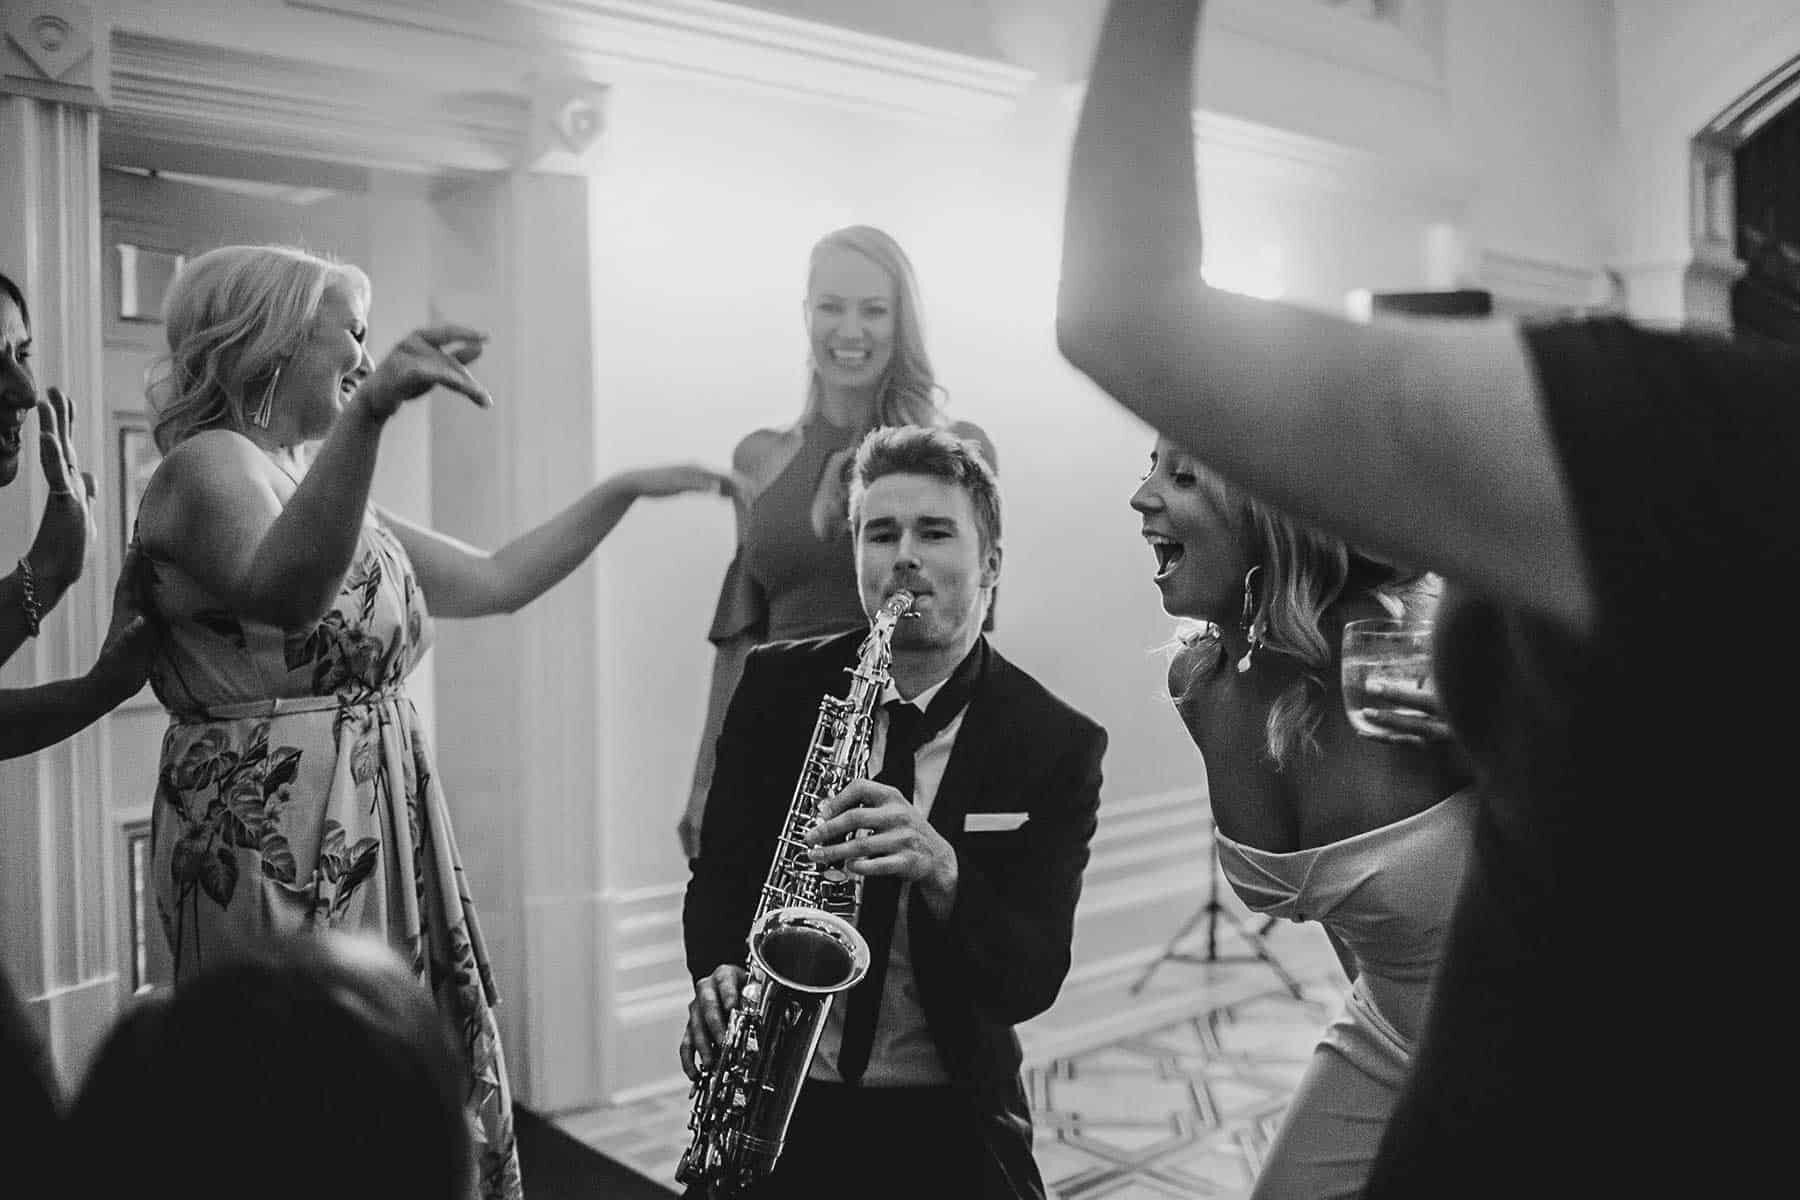 Melbourne Event Company - professional wedding band and DJ service